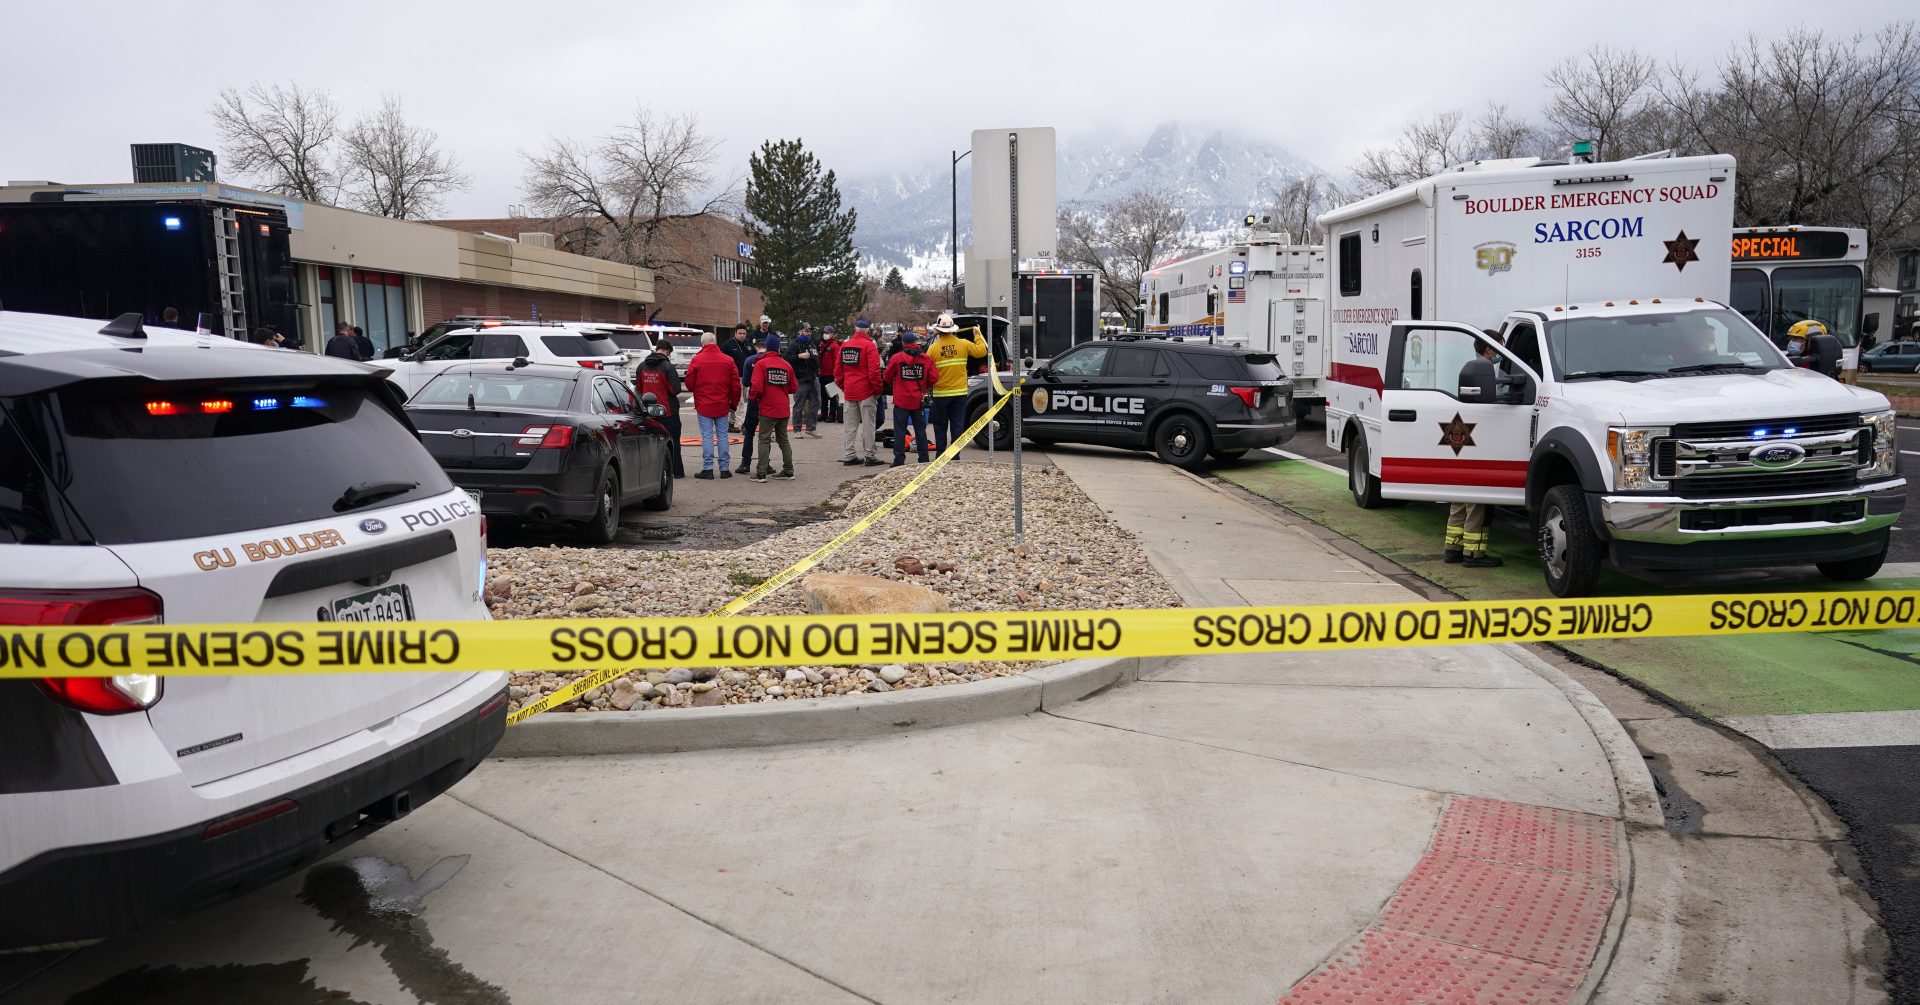 Police work on the scene outside a King Soopers grocery store where a shooting took place Monday, March 22, 2021, in Boulder, Colo.